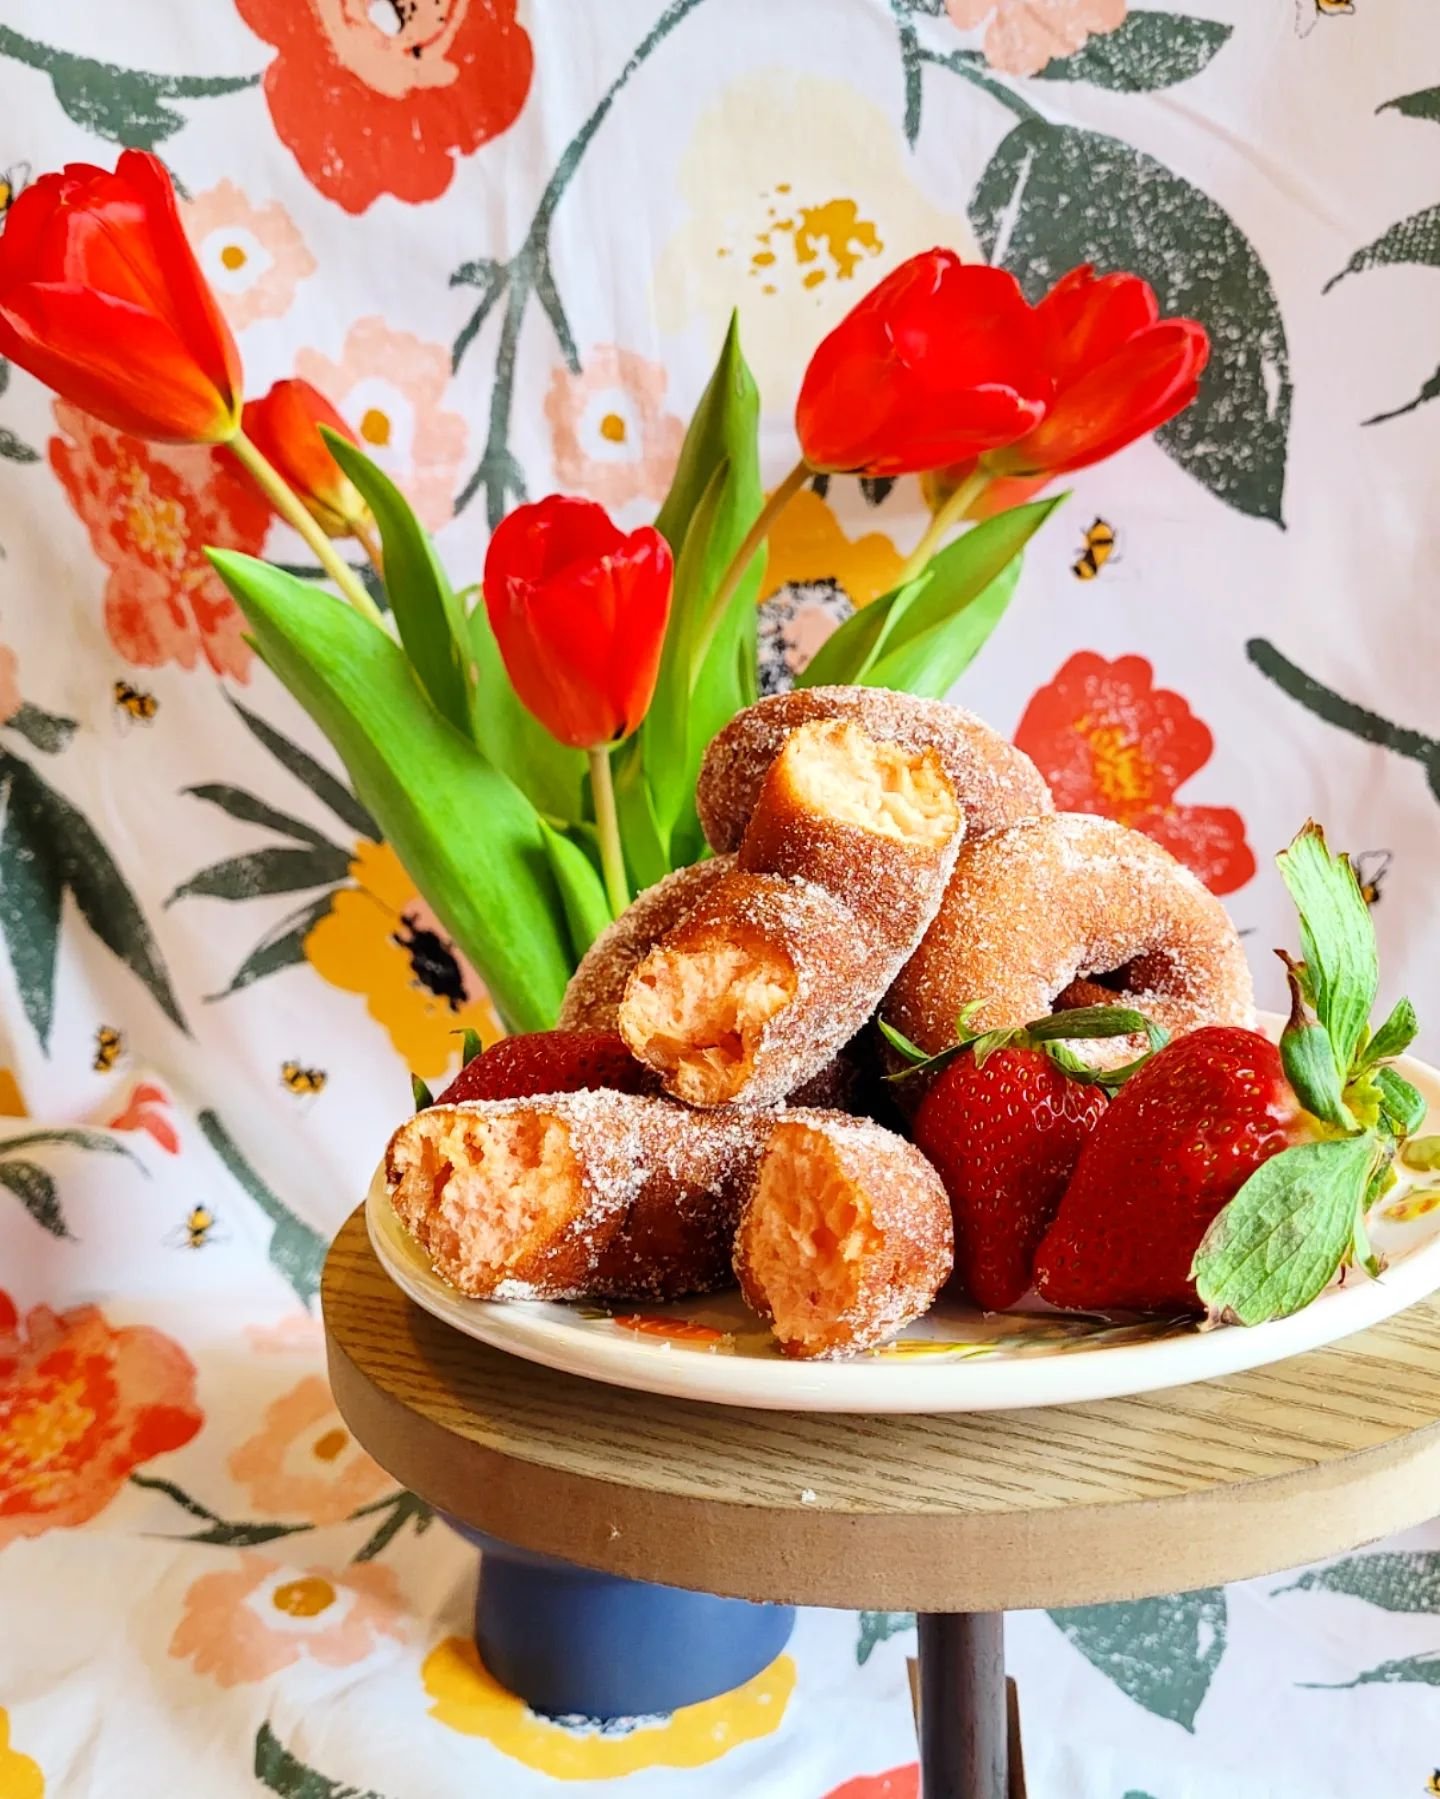 strawberry donuts with red tulips.jpg